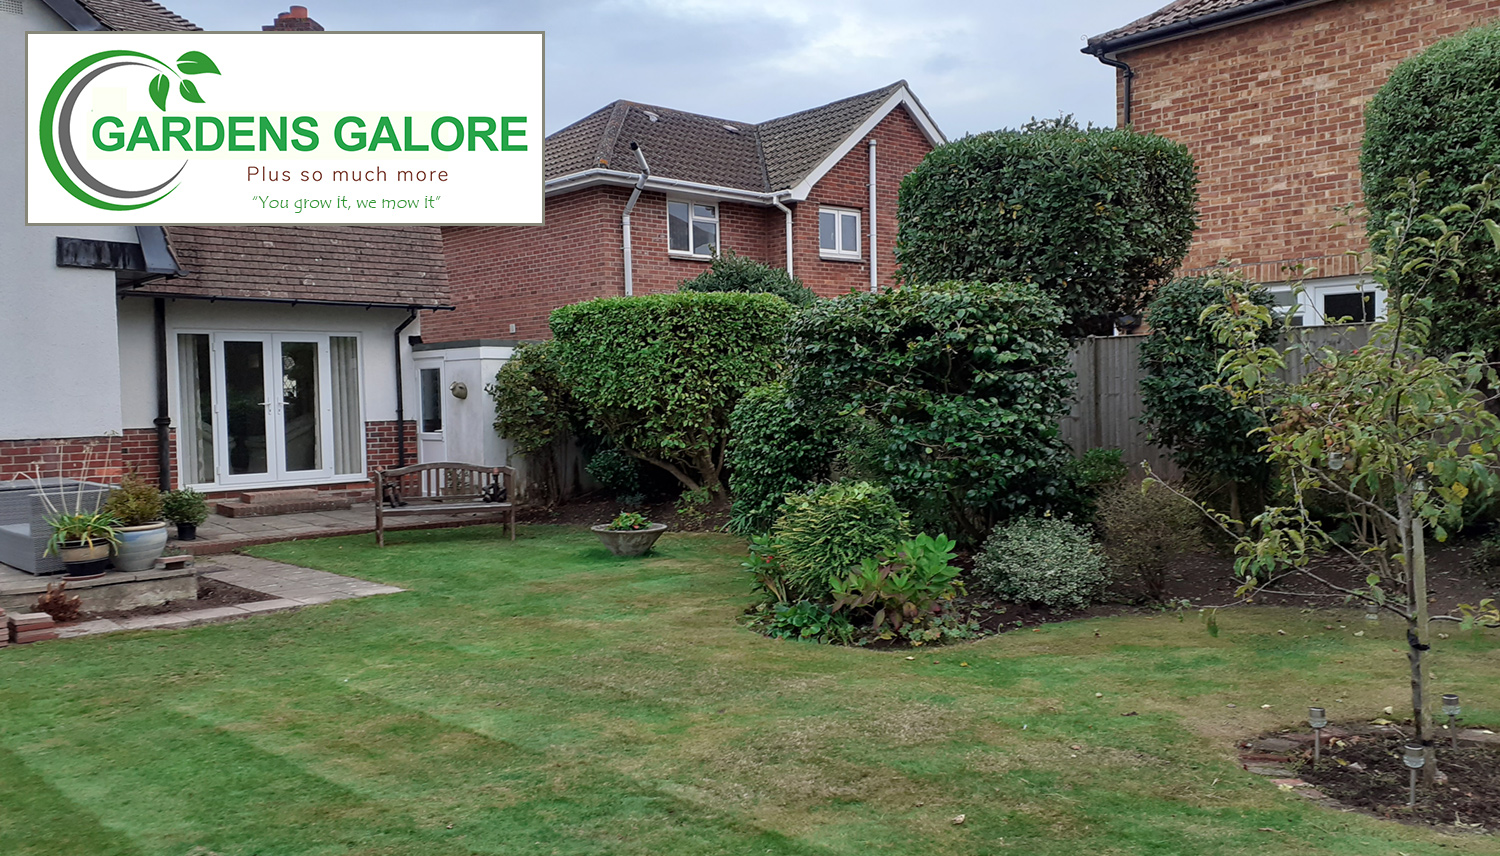 Gardening services by Gardens Galore, Lee on Solent, Hampshire